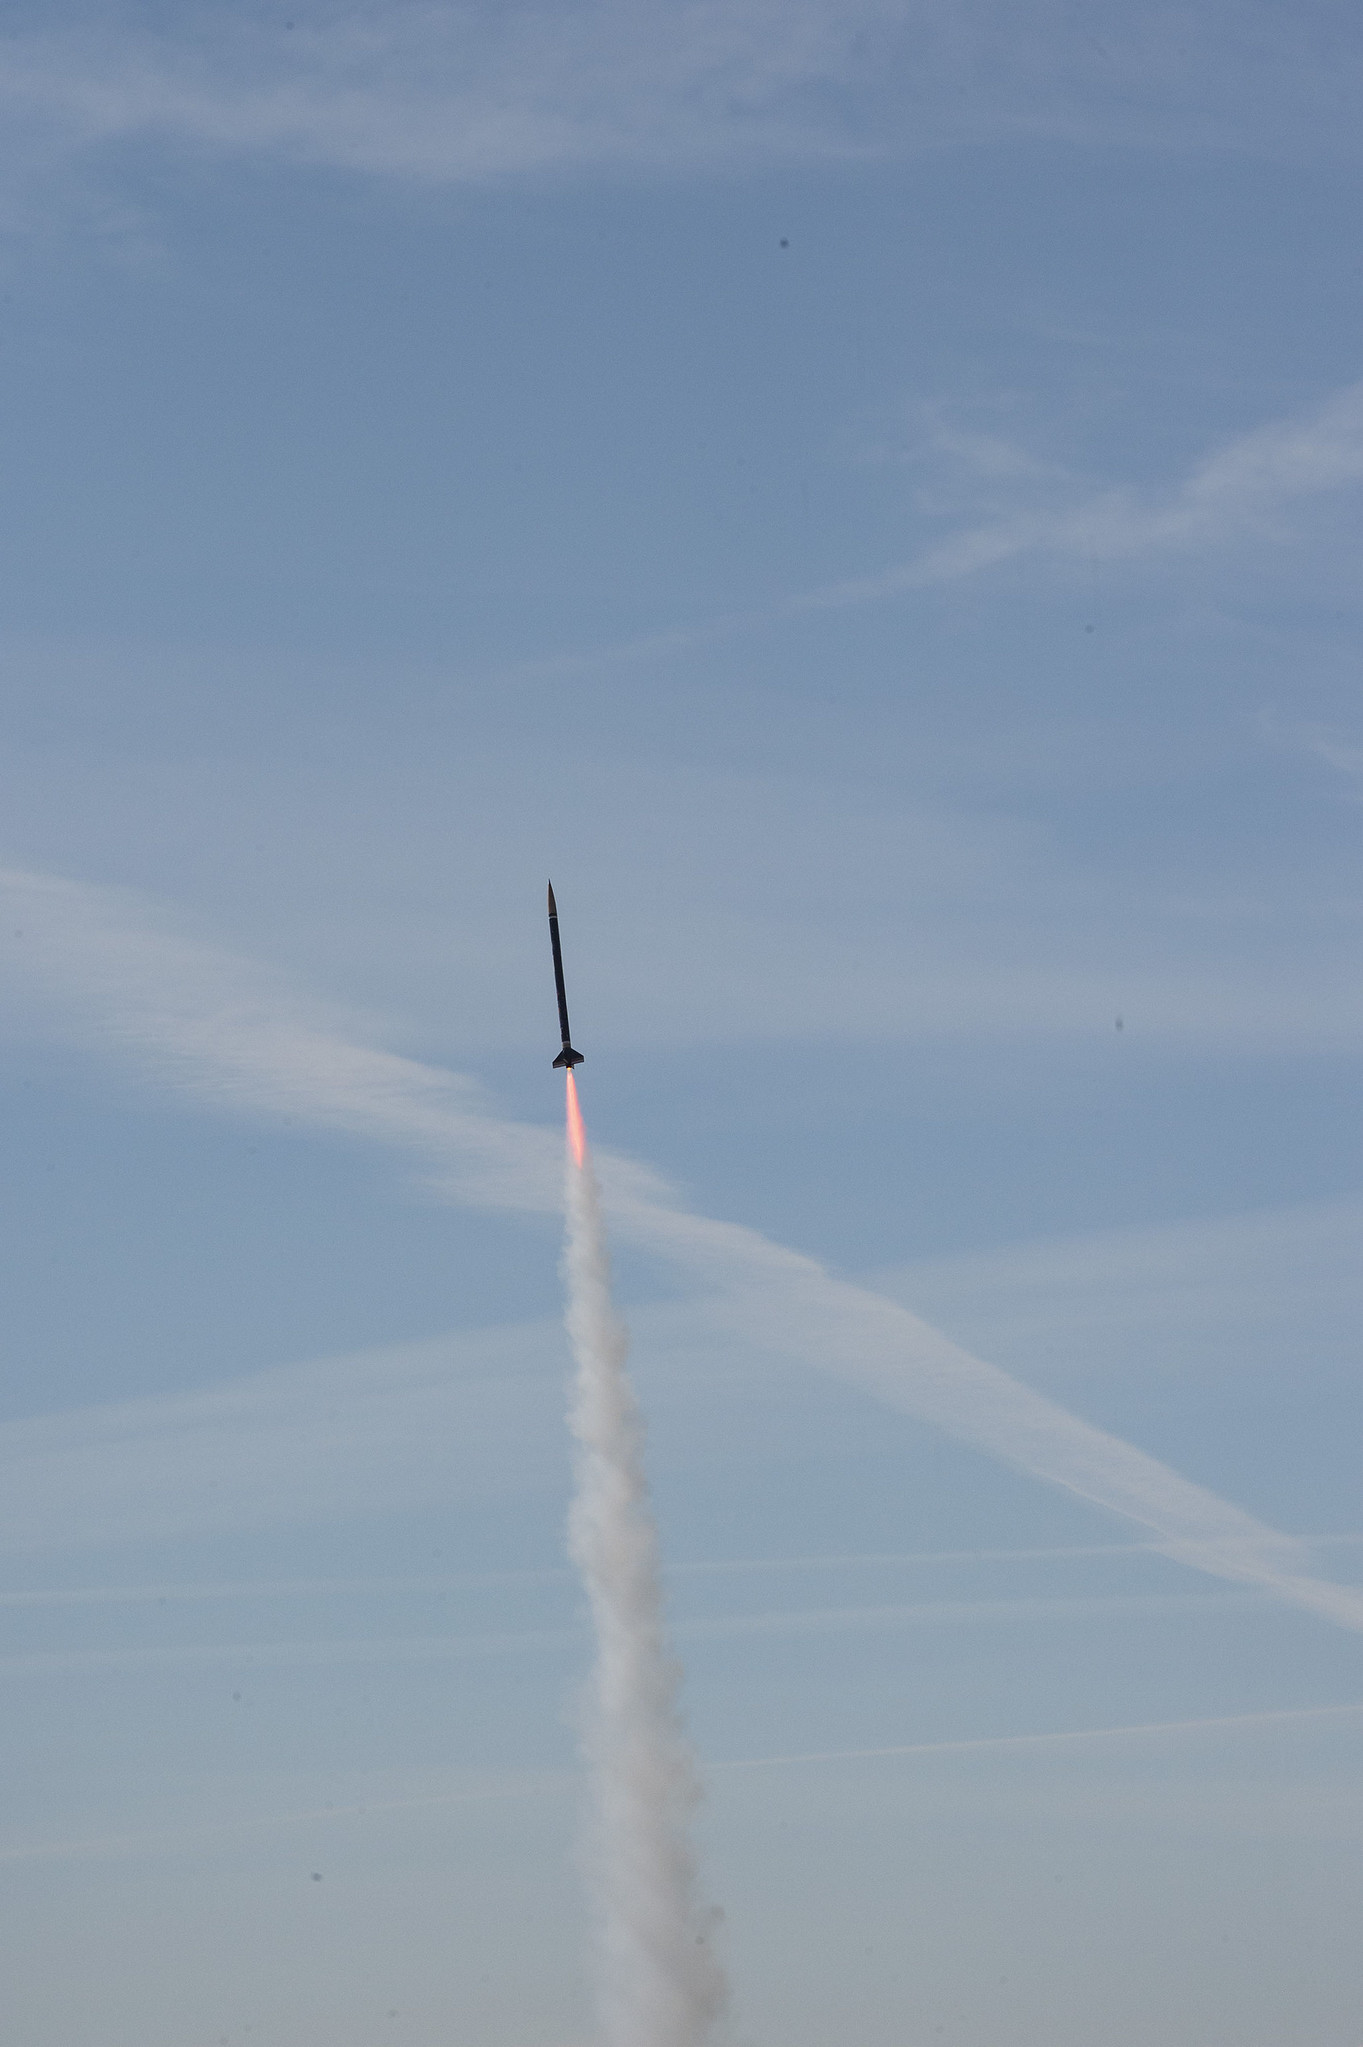 High-powered amateur rocket launches